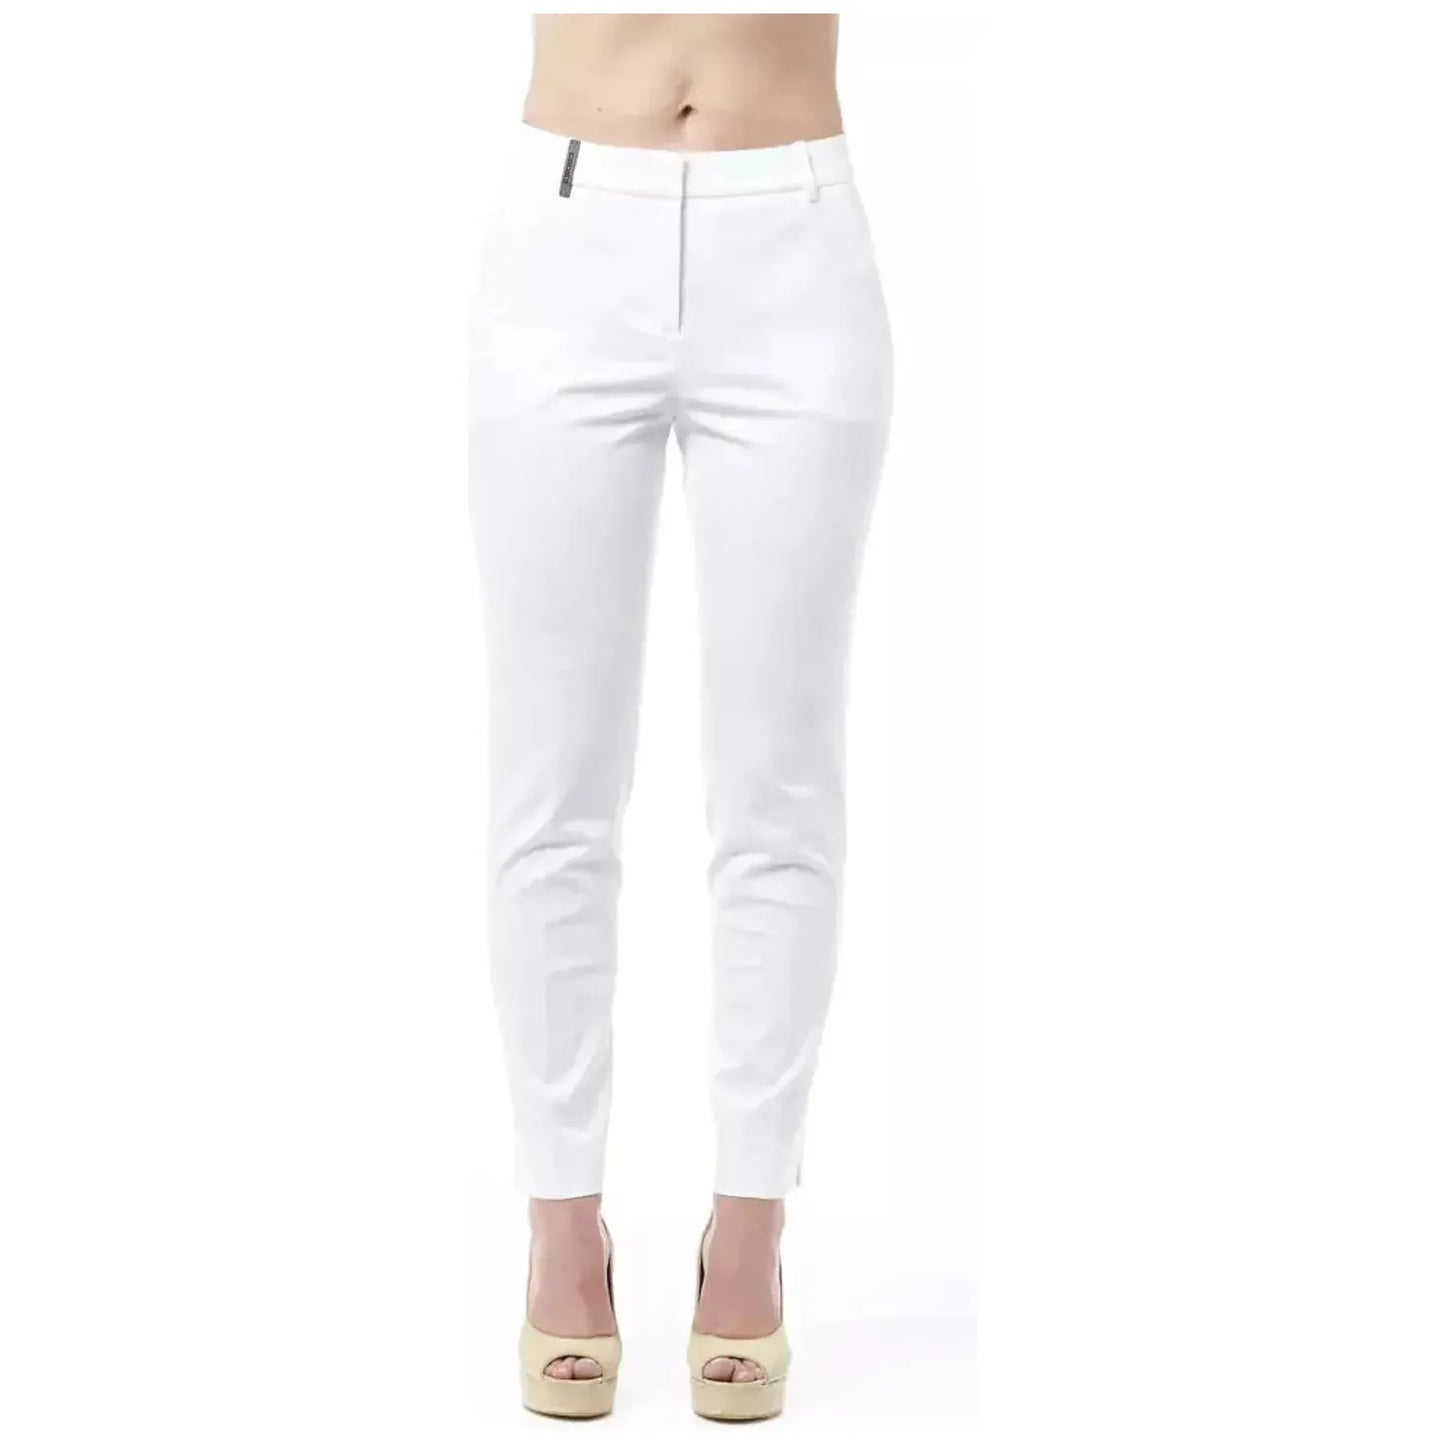 Peserico Chic High Waist Cigarette Leg Trousers white-cotton-jeans-pants stock_product_image_21274_537908337-31-cded3011-91b_8a2c377f-dead-4f56-83d6-1cd6c592ed00.webp